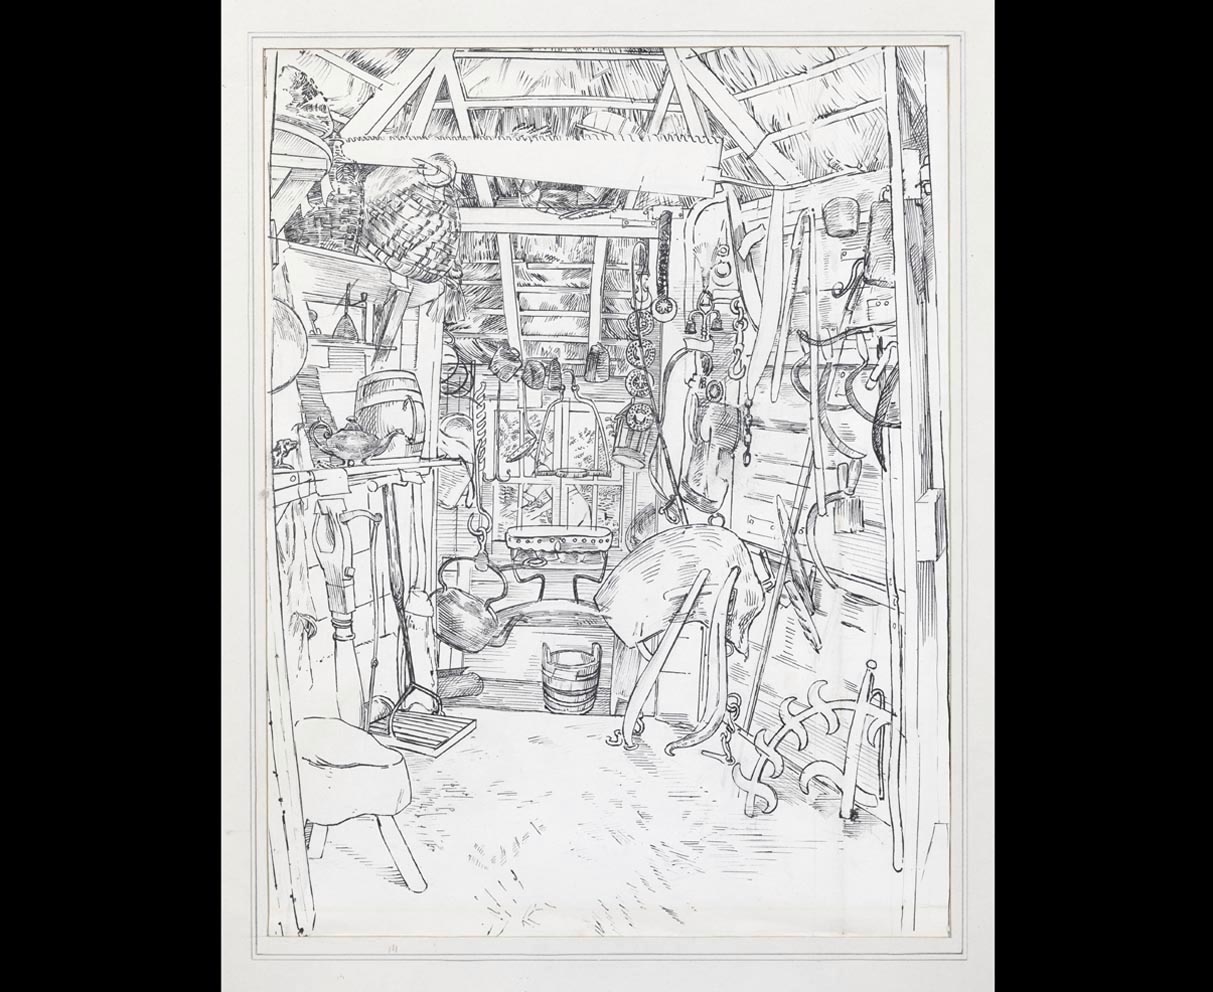 This drawing shows the interior of a hut that the interwar writer H. J. Massingham had built in the orchard of his home ‘Reddings’, in Long Crendon, Buckinghamshire. The object collection seen stored in this hut was donated by him to The MERL in 1951.